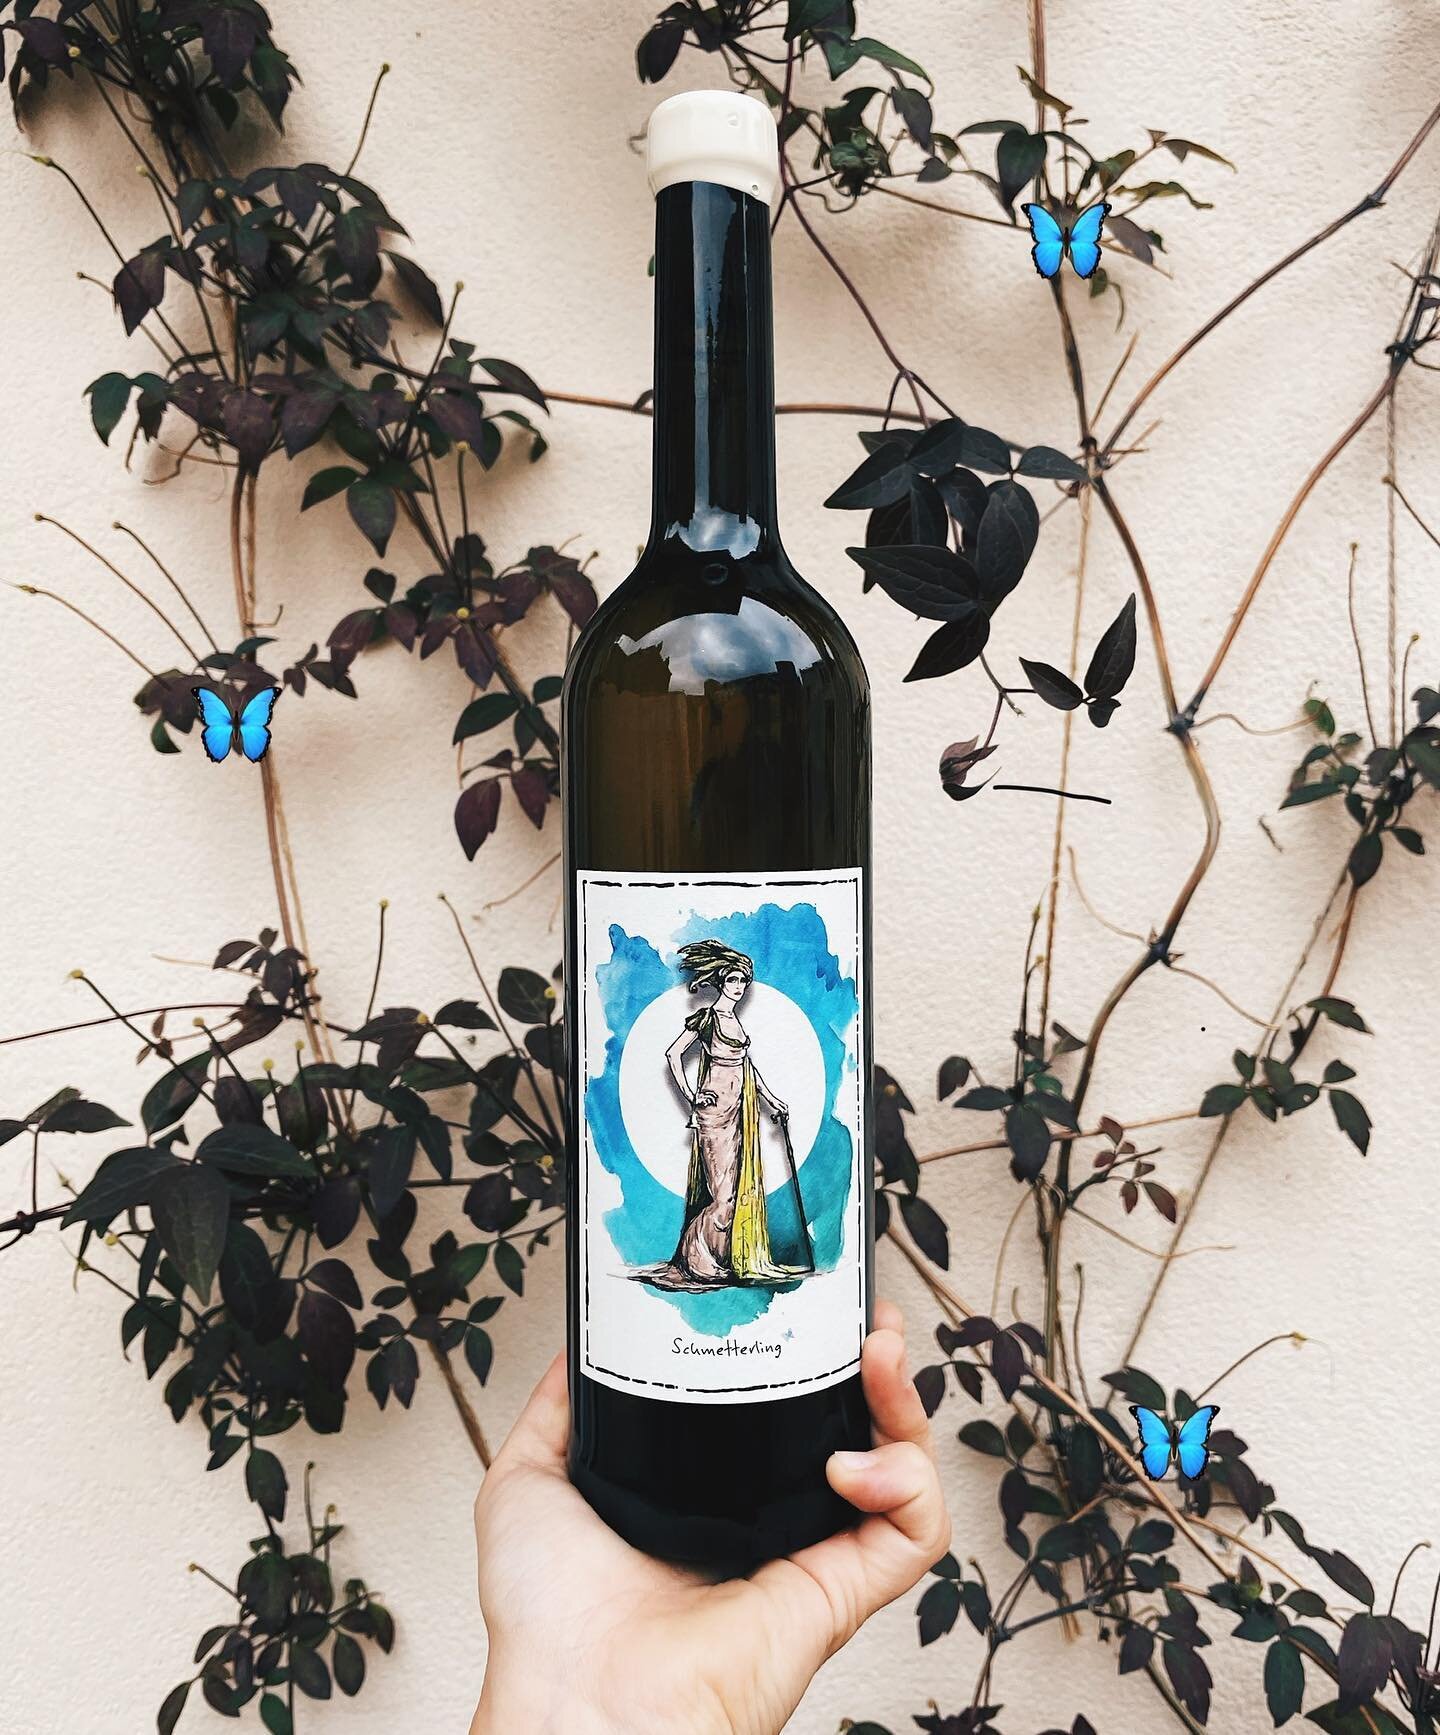 come my lady, come come my lady
you&rsquo;re my butterfly, sugar baby
come my lady, come come my lady
@madameflockwines makes your leg shake, you make me go crazy

monday morning mood - spread your wings and fly. I see the sun breaking, shining throu